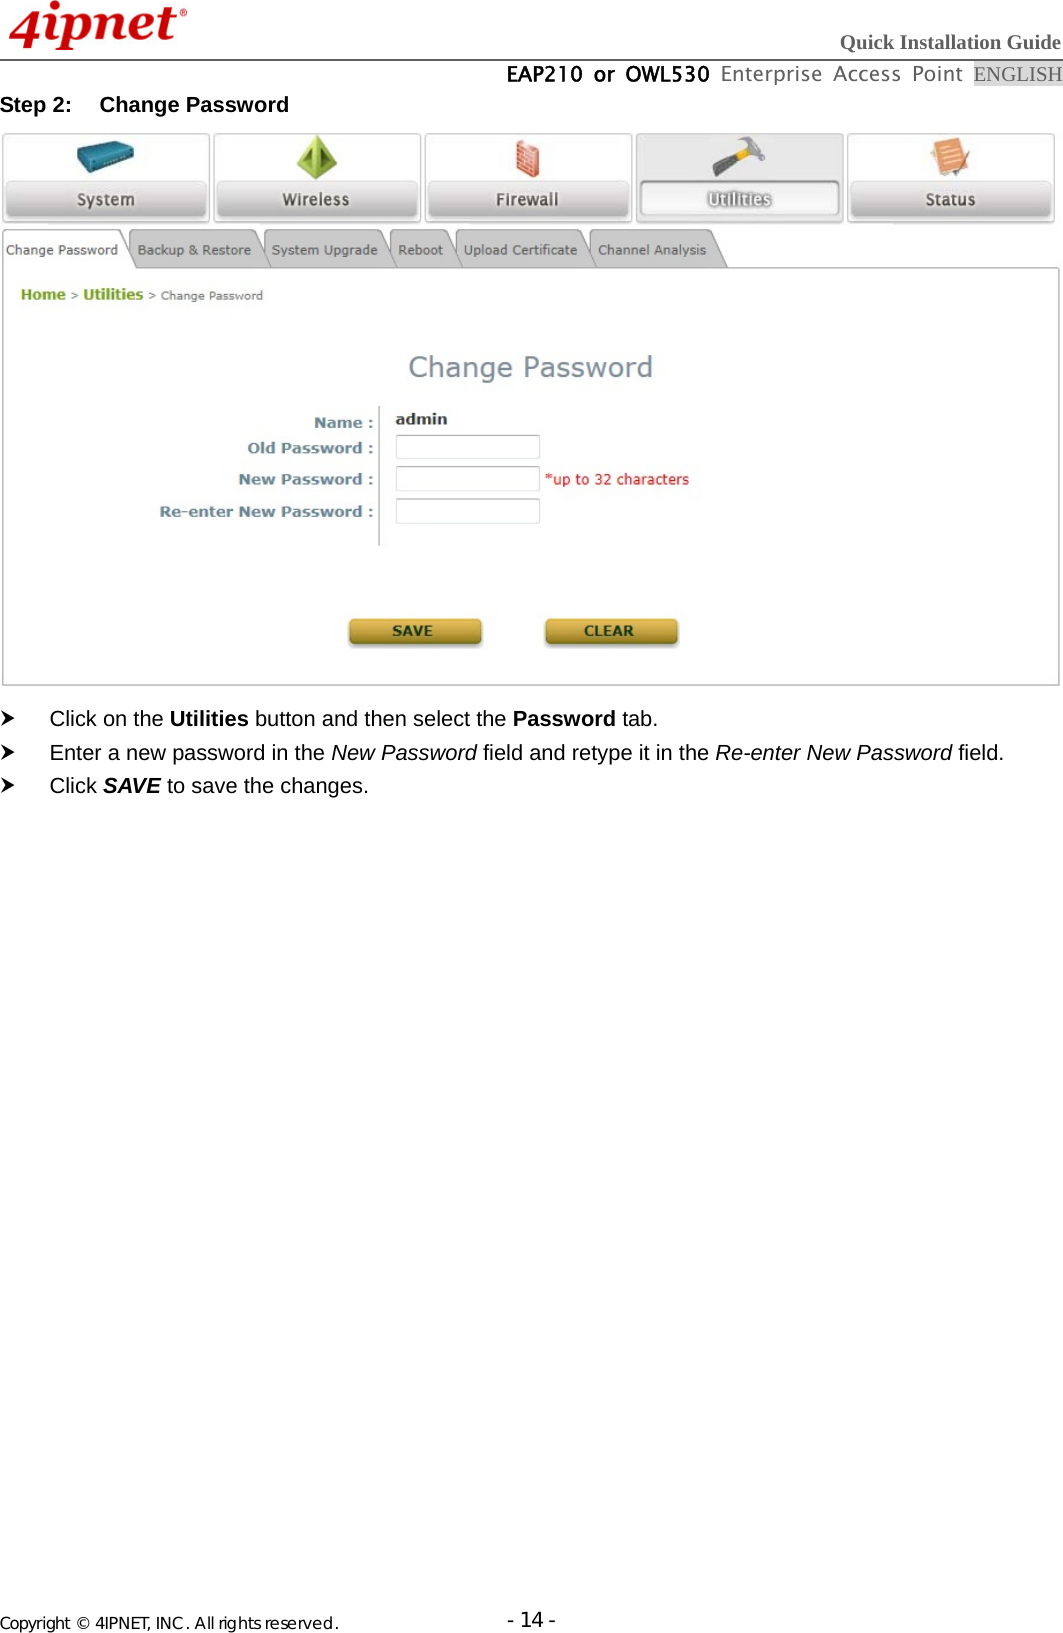  Quick Installation Guide  EAP210 or OWL530 Enterprise Access Point ENGLISH Copyright © 4IPNET, INC. All rights reserved.                       - 14 -Step 2:  Change Password      Click on the Utilities button and then select the Password tab.   Enter a new password in the New Password field and retype it in the Re-enter New Password field.  Click SAVE to save the changes.  